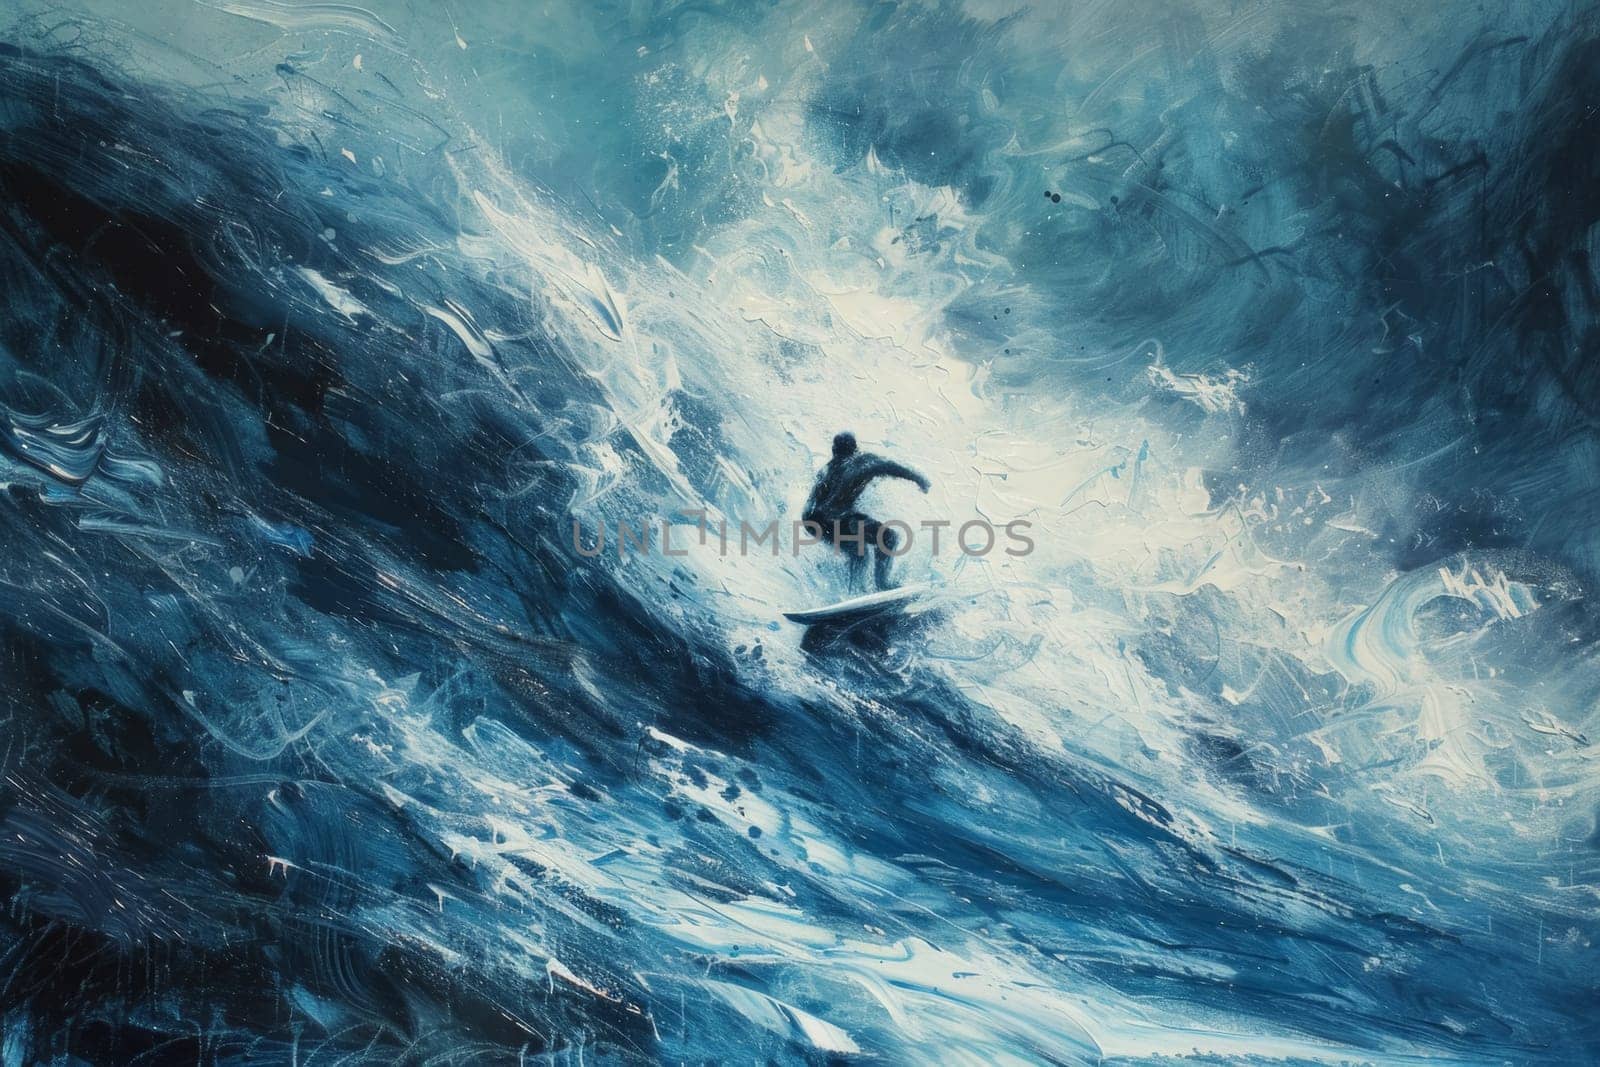 An expressionistic painting portrays the dynamic movement of a surfer riding a tumultuous wave, invoking a sense of passion and risk